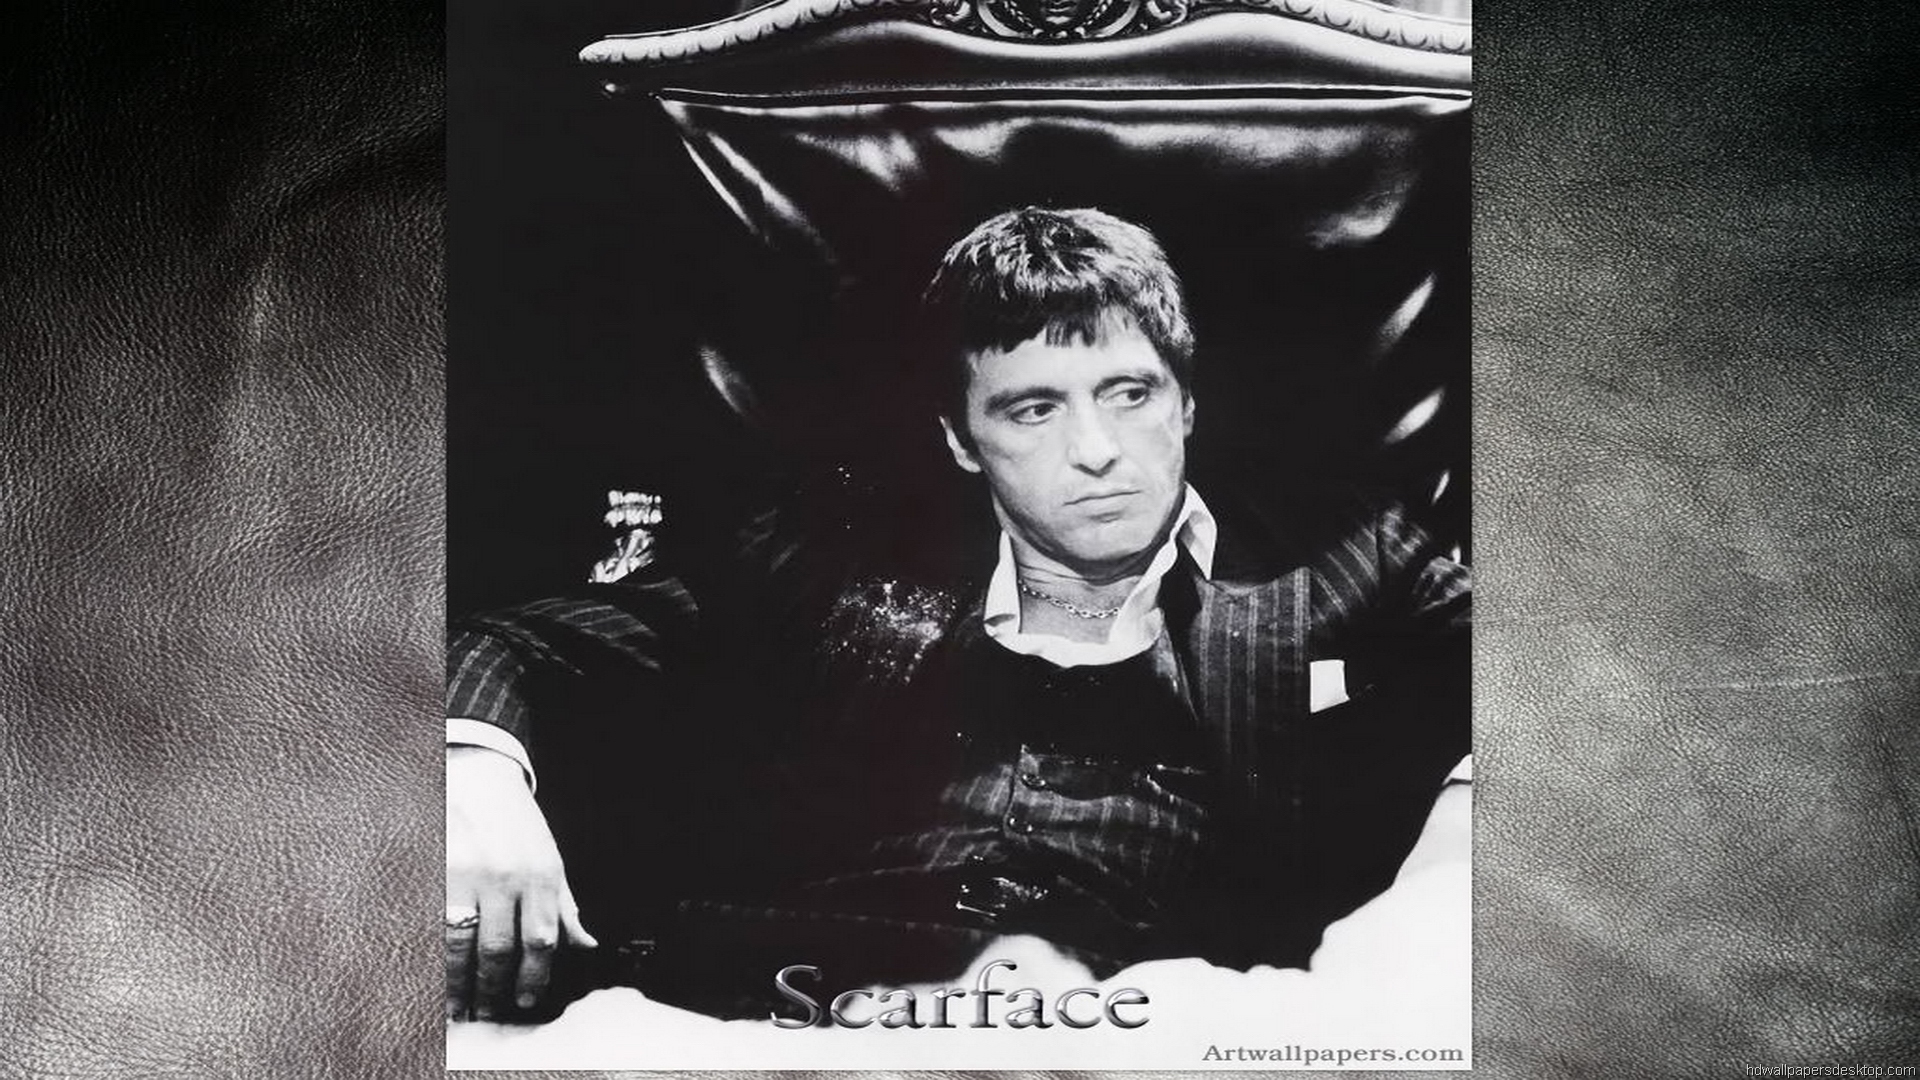 Scarface Movie Wallpaper Image